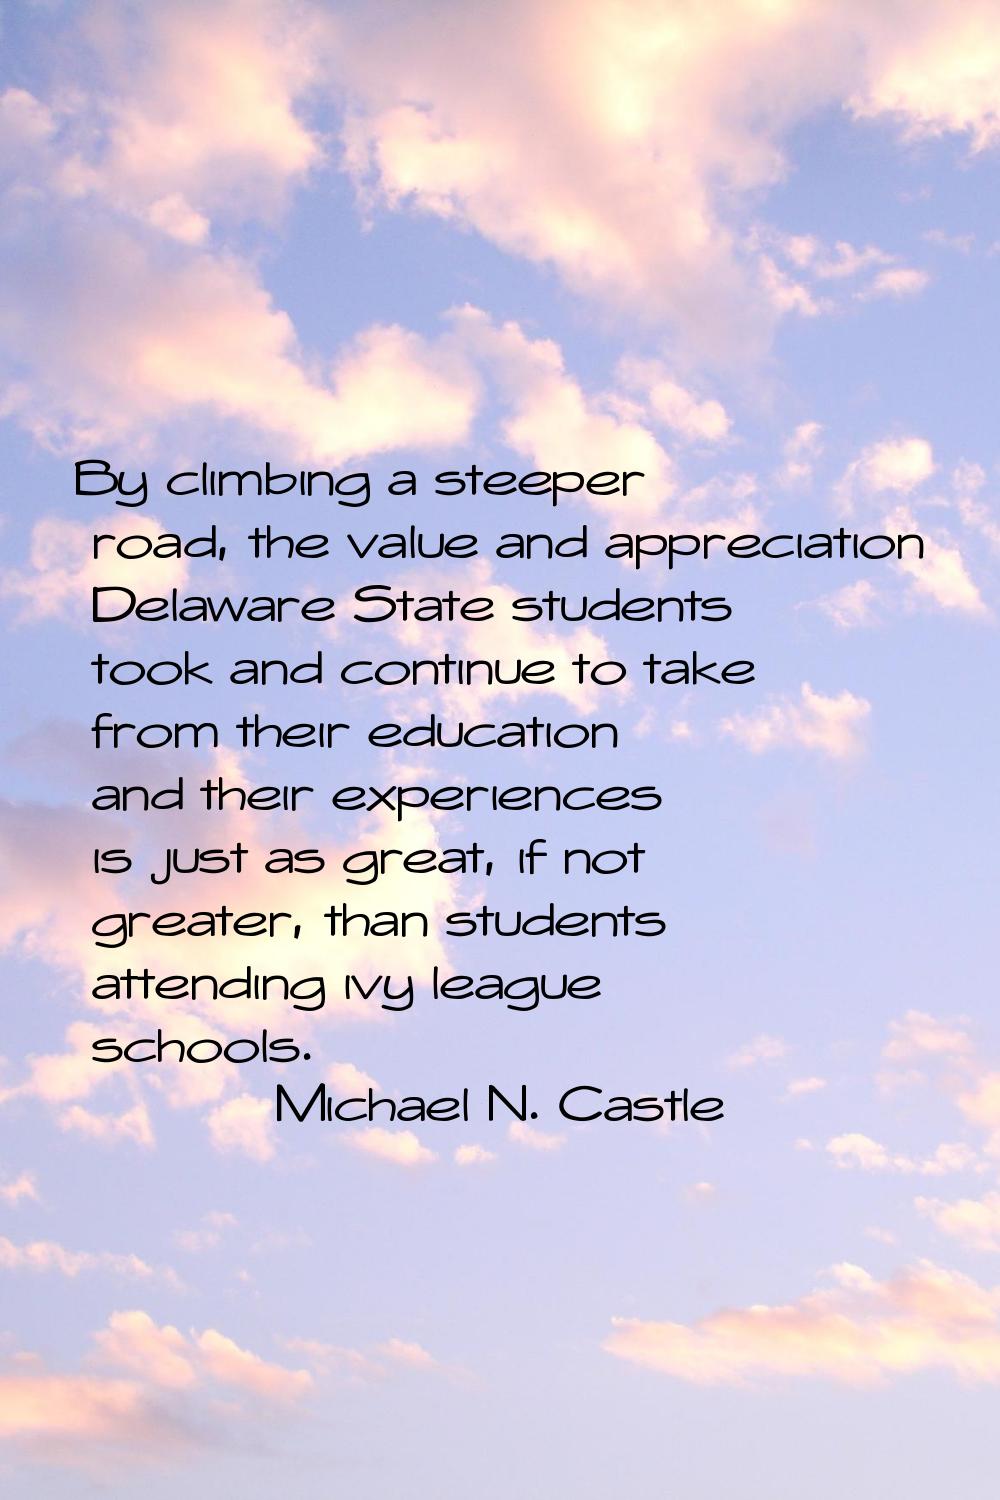 By climbing a steeper road, the value and appreciation Delaware State students took and continue to